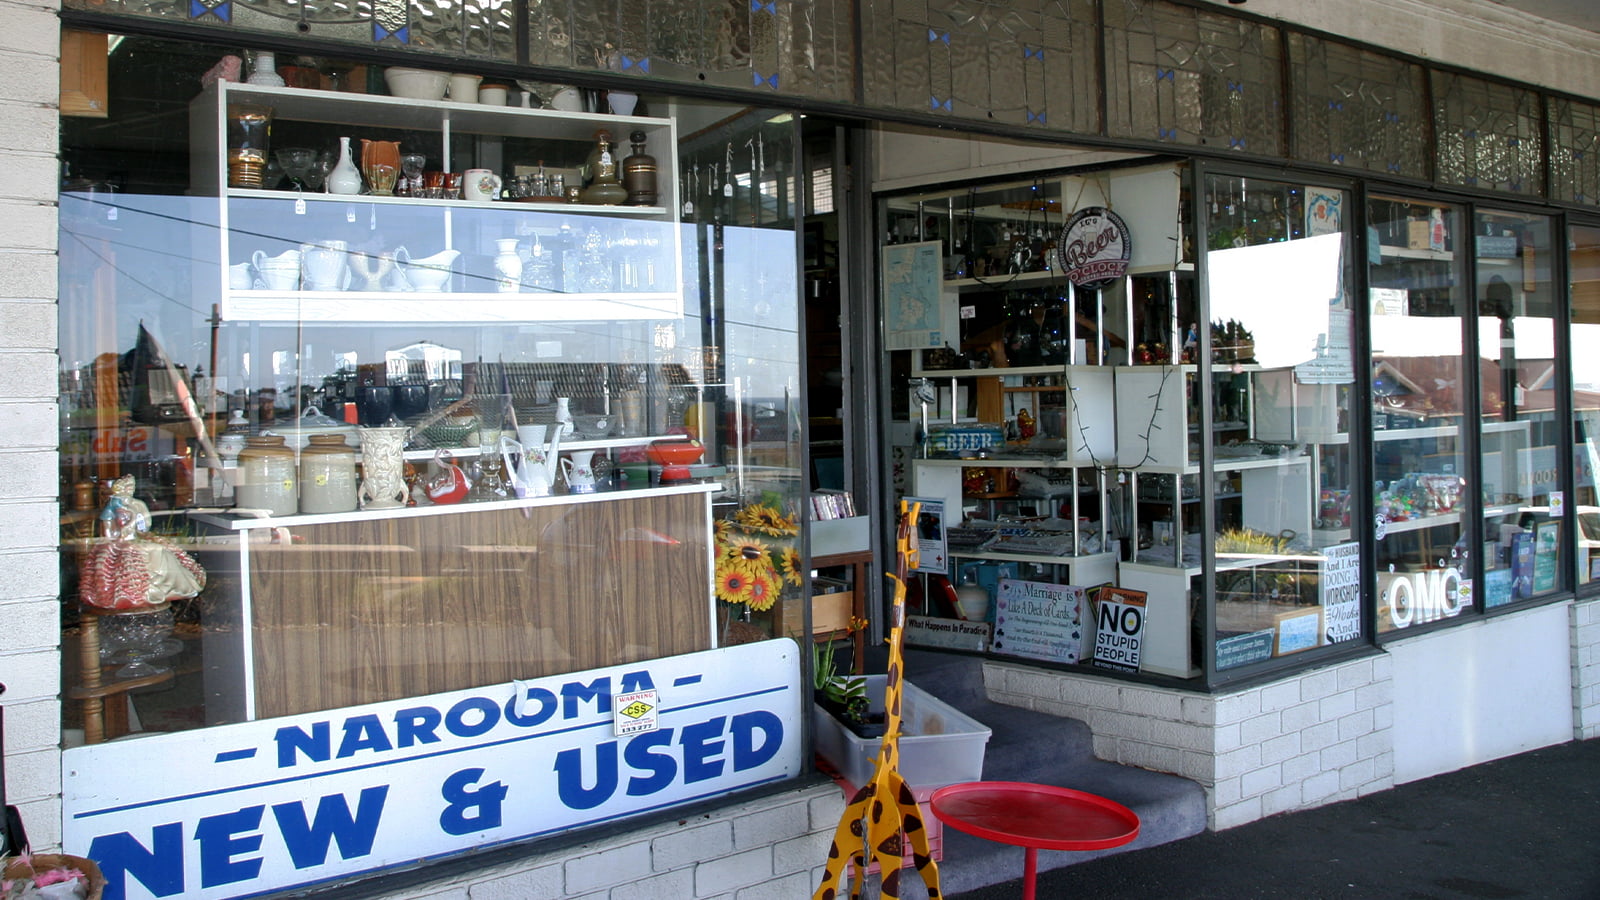 Narooma New and Used